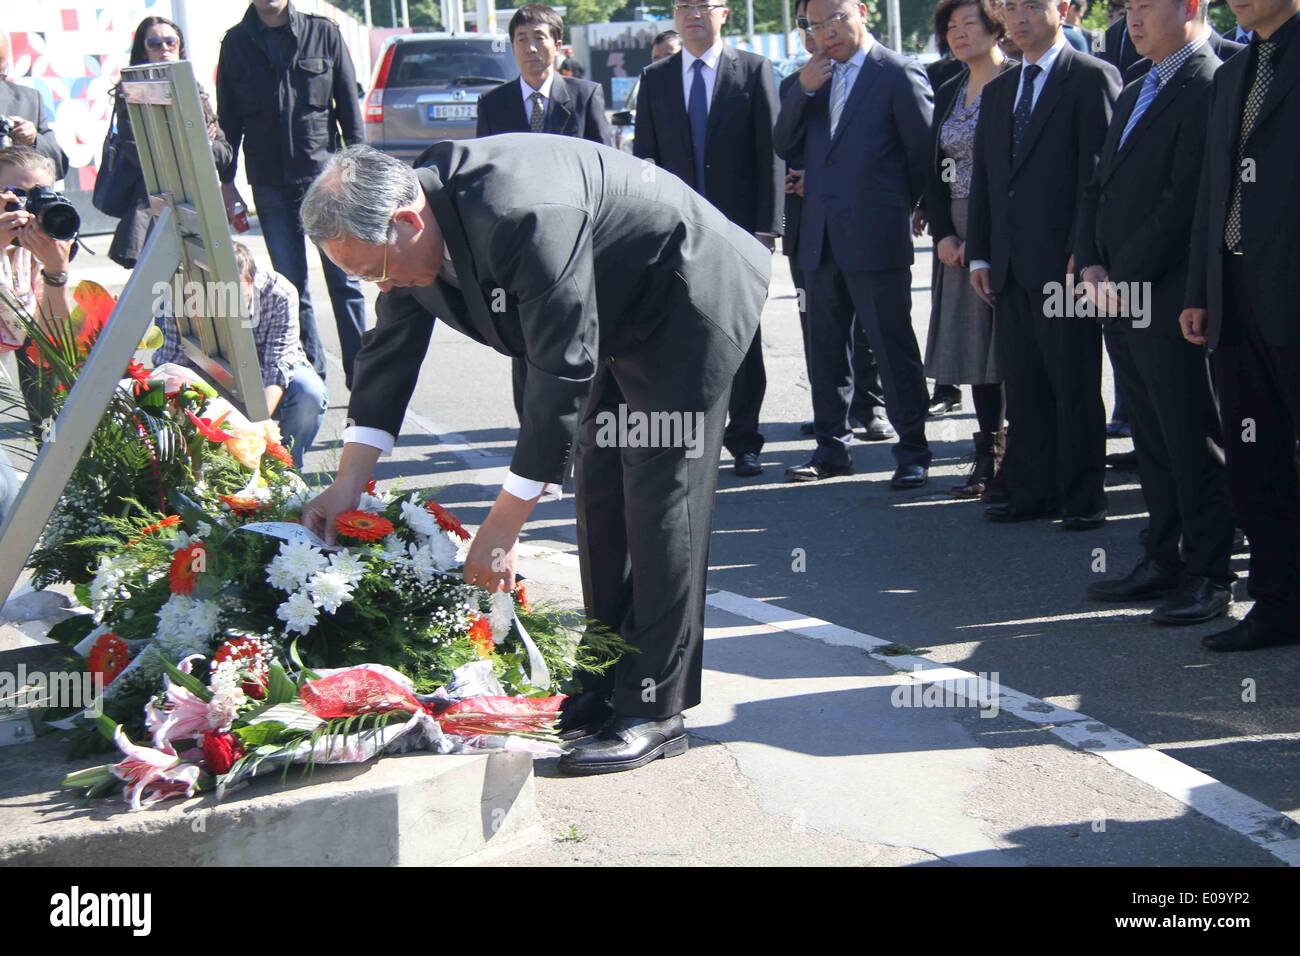 Belgrade, May 7. 7th May, 1999. Chinese ambassador to Serbia Zhang Wanxue (Front) shows respect for three Chinese journalists killed in the U.S.-led NATO bombing of the Chinese embassy in Belgrade, in front of a monument in Belgrade, capital of Serbia, on May 7, 2014. Shao Yunhuan of Xinhua News Agency along with Xu Xinghu and his wife Zhu Ying from the Beijing-based Guangming Daily newspaper were killed in the missile attack which inflicted serious damage to the embassy buildings on the evening of May 7, 1999. Credit:  Wang Hui/Xinhua/Alamy Live News Stock Photo